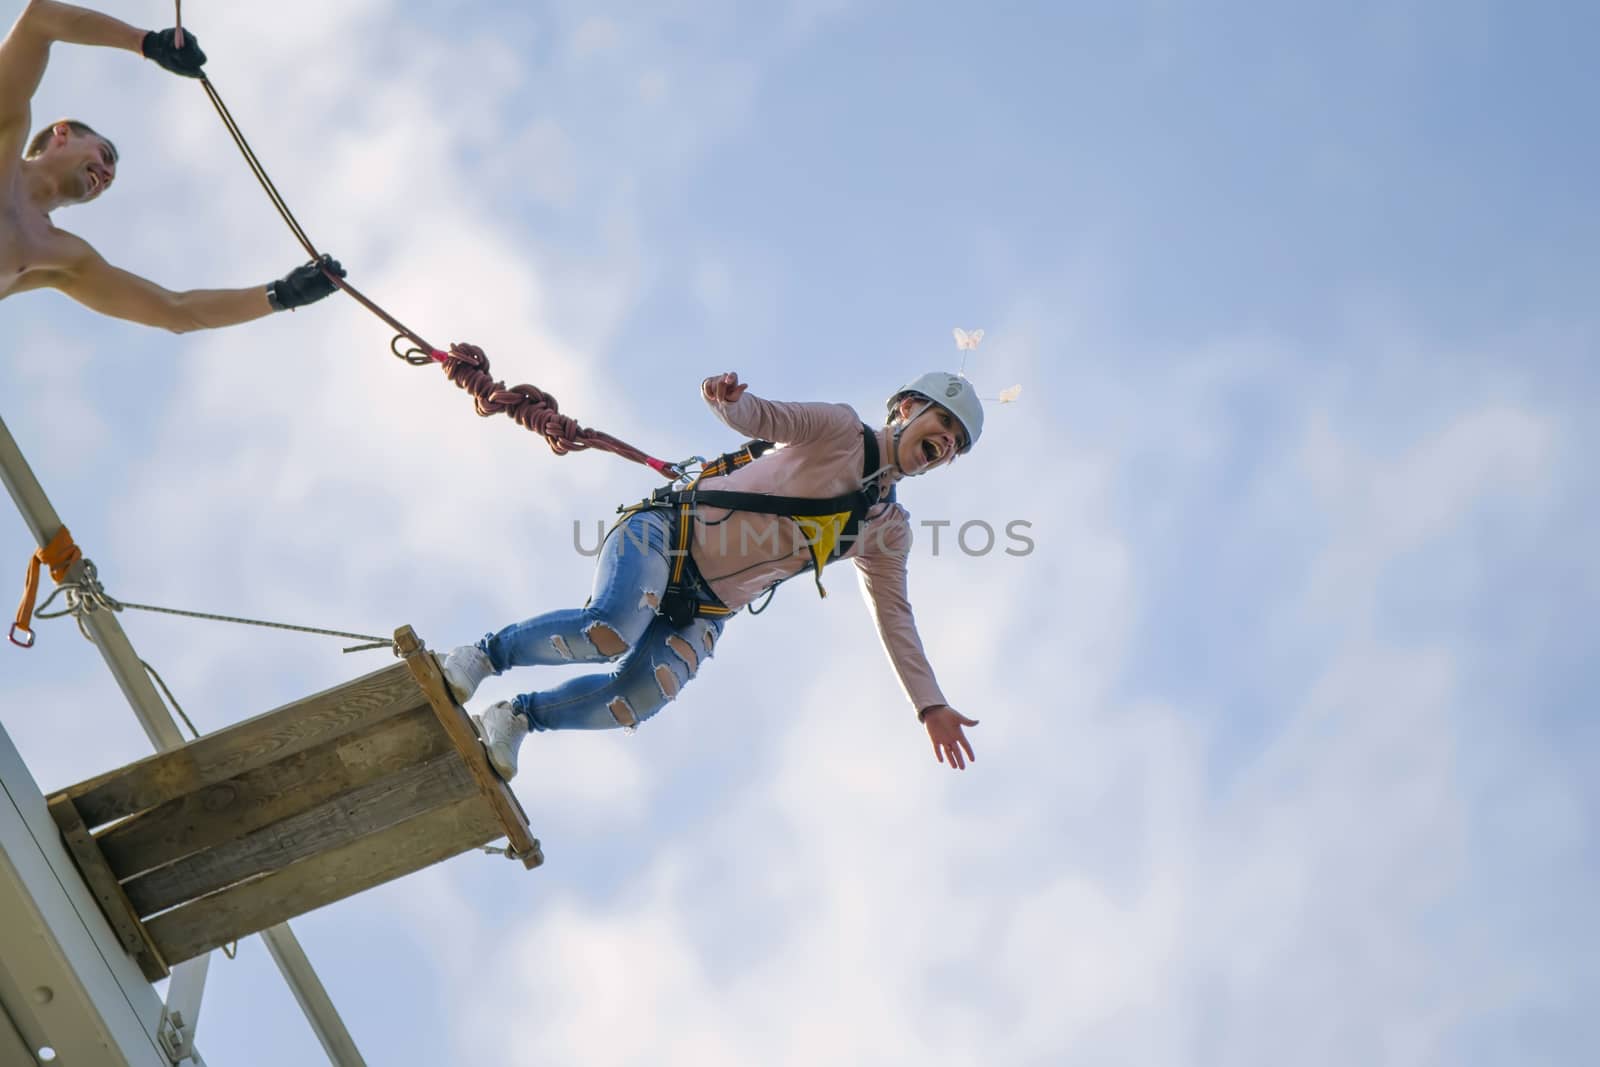 Flight down on the rope.Engage in ropejumpThe brave girl jumped from the bridge and flies in the sky.ing.Dangerous hobbies